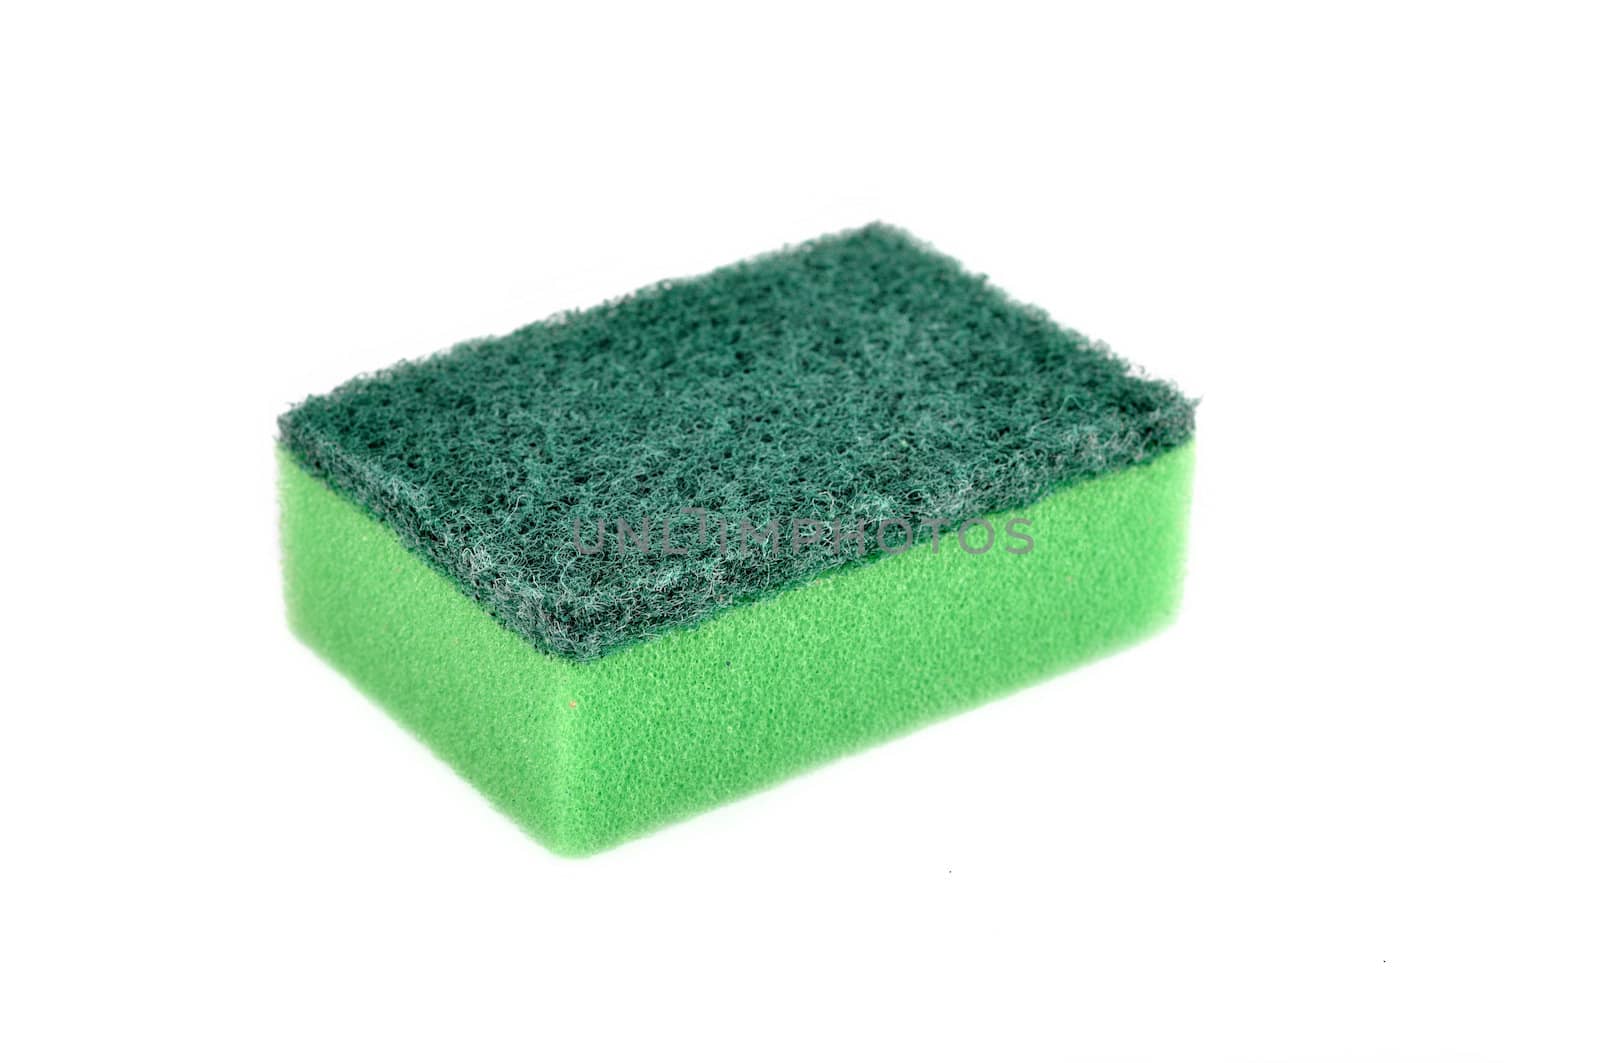 A green sponge dish isolated on white